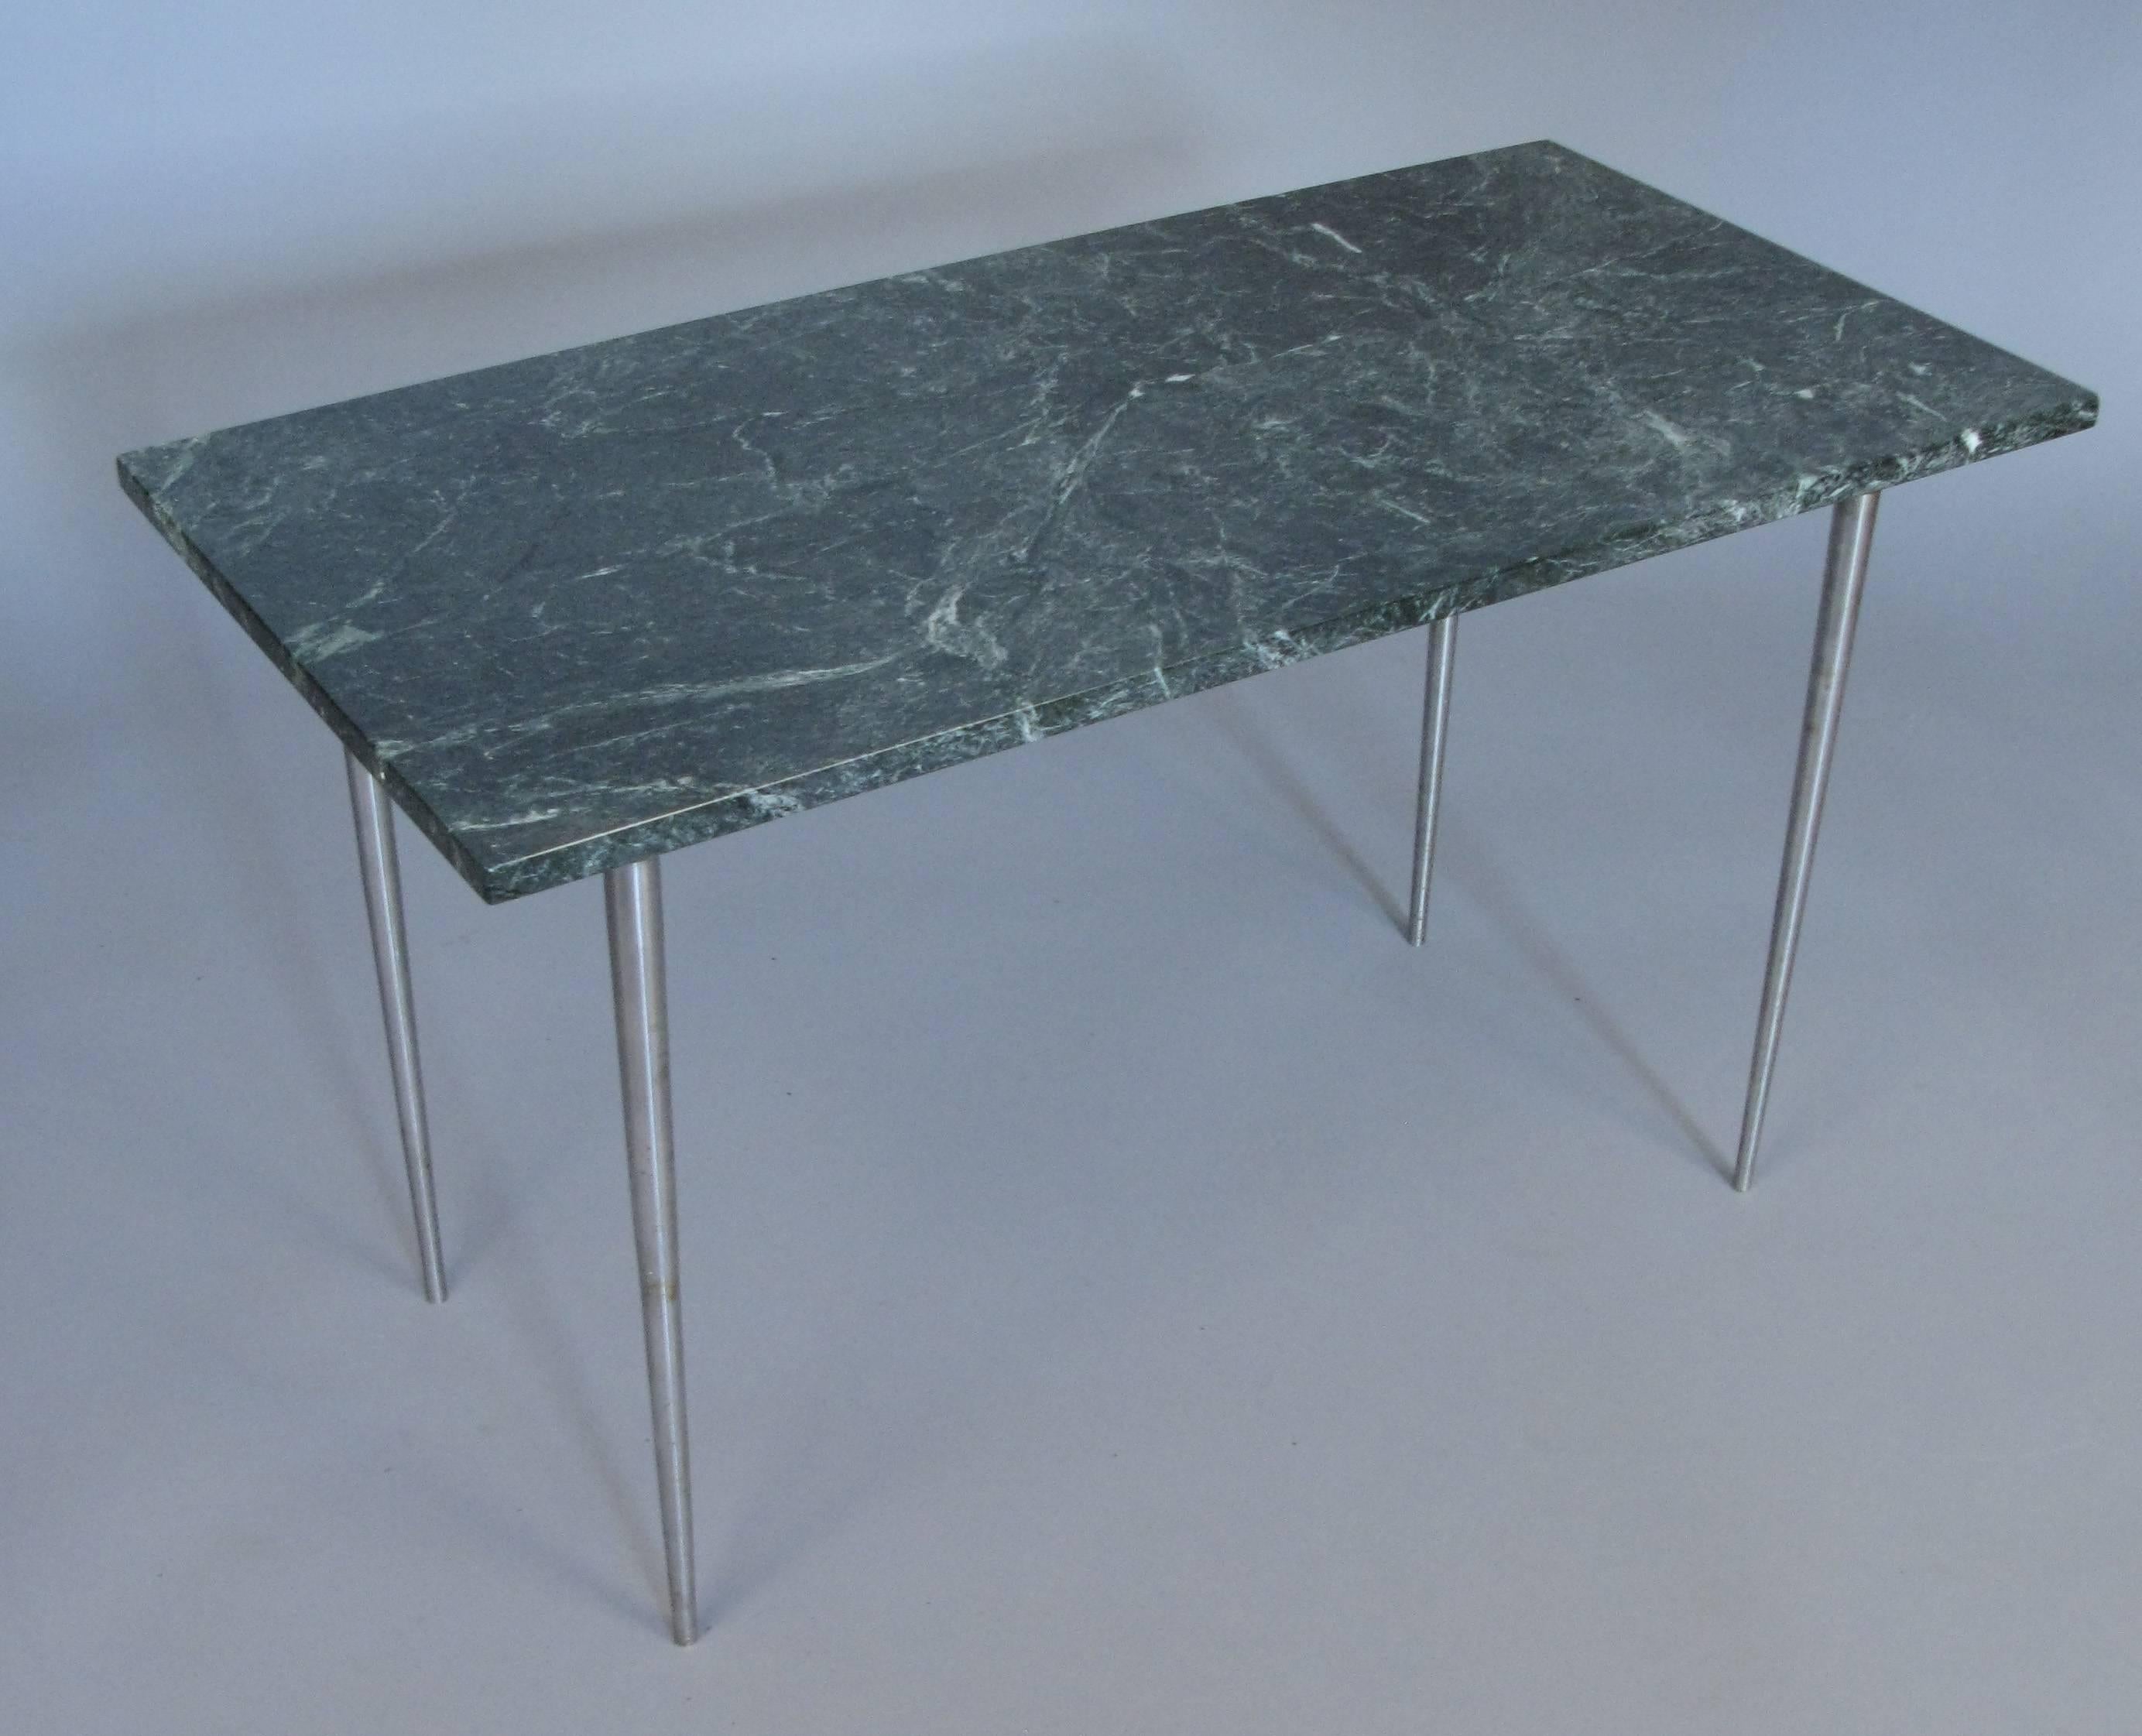 A very handsome vintage 1960s side table with brushed steel base with tapered tall legs and an Italian green marble-top. Elegant and spare design and in very good condition.